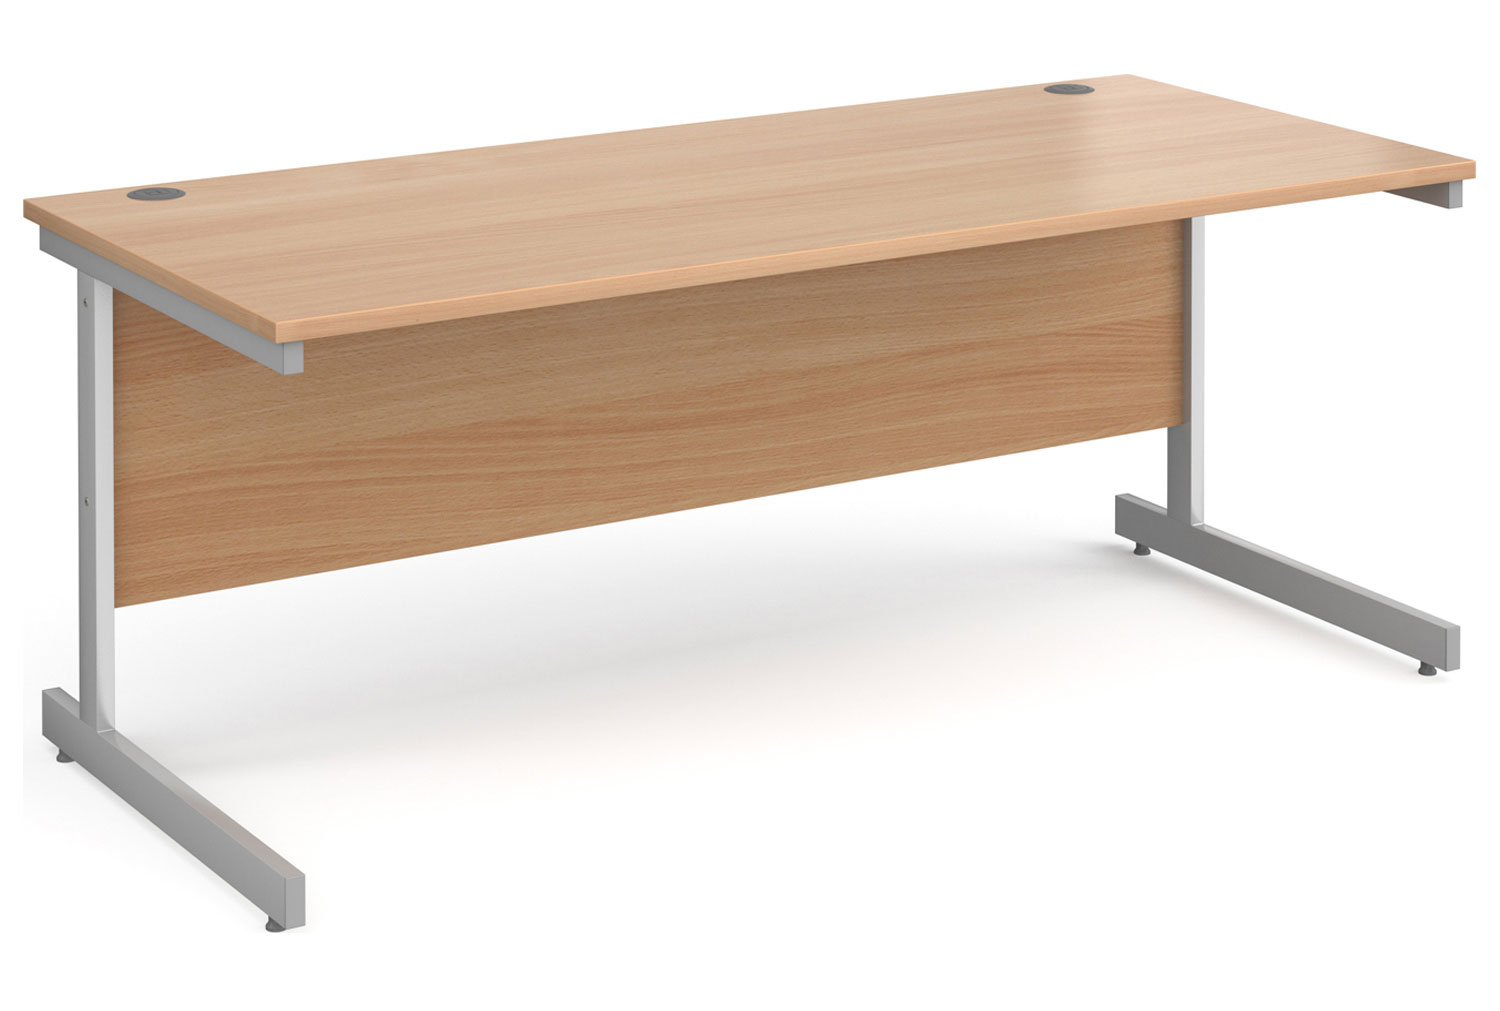 Tully I Rectangular Office Desk, 180wx80dx73h (cm), Beech, Express Delivery